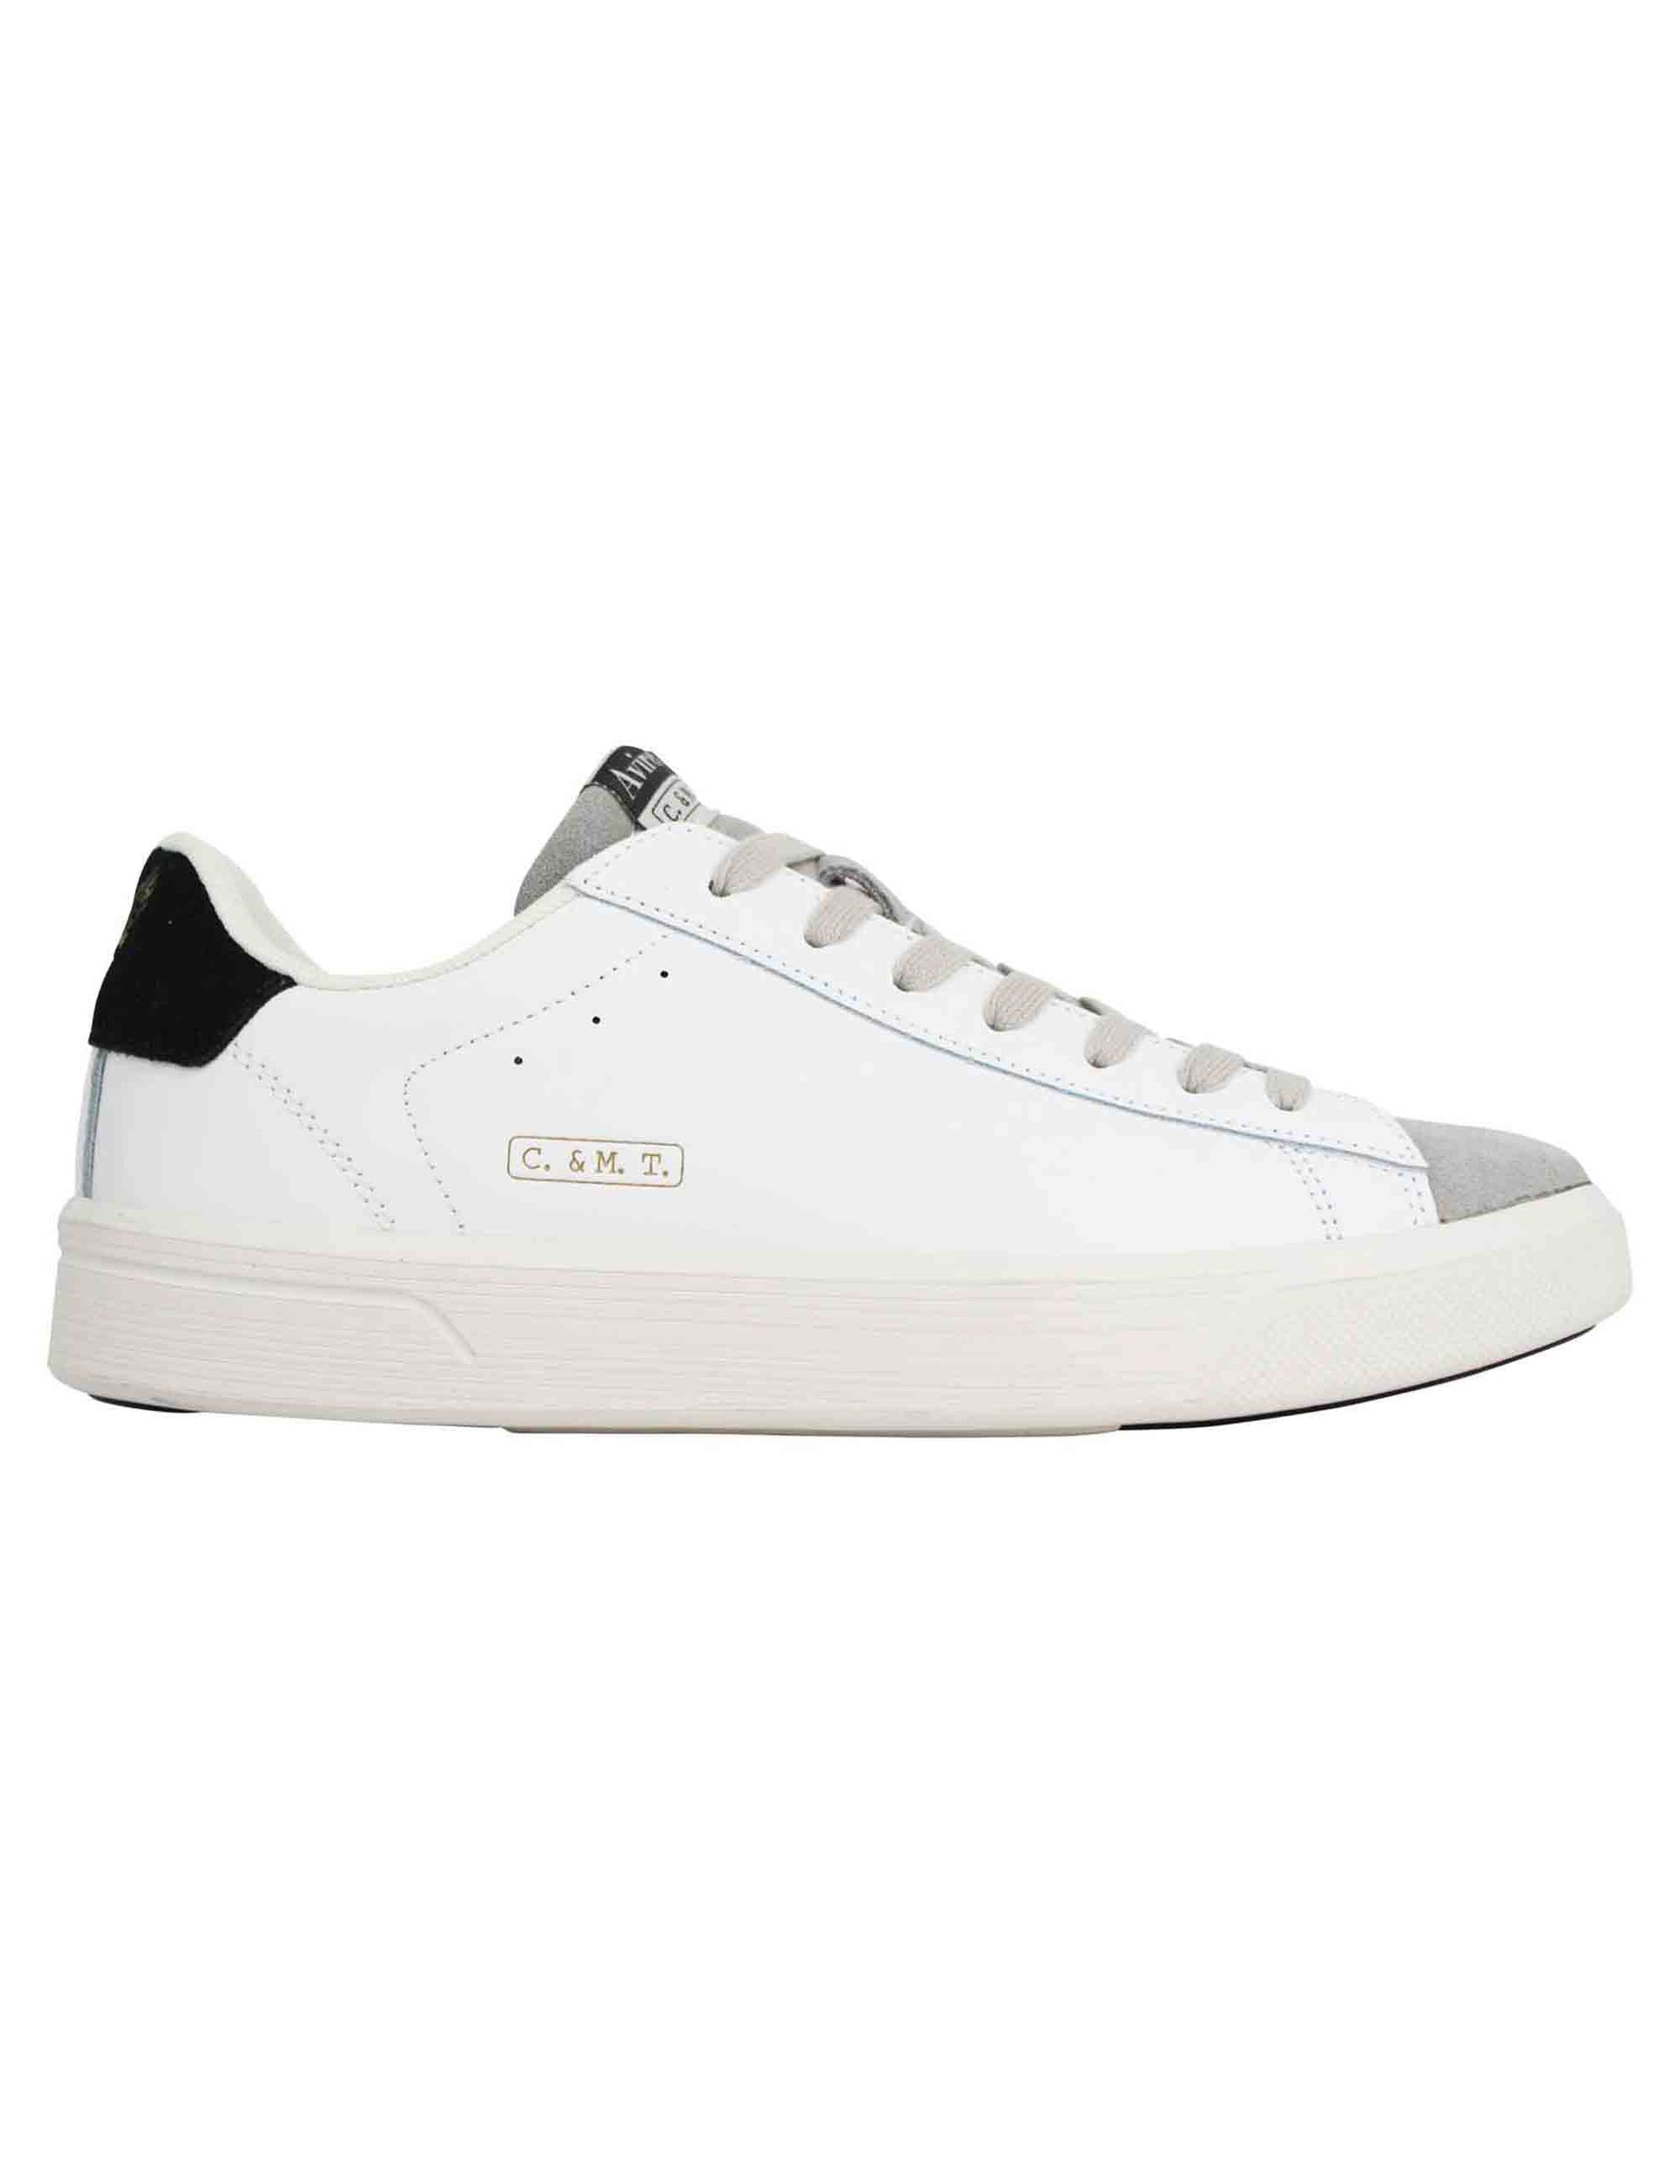 Mikel men's sneakers in white vegan leather with vintage sole